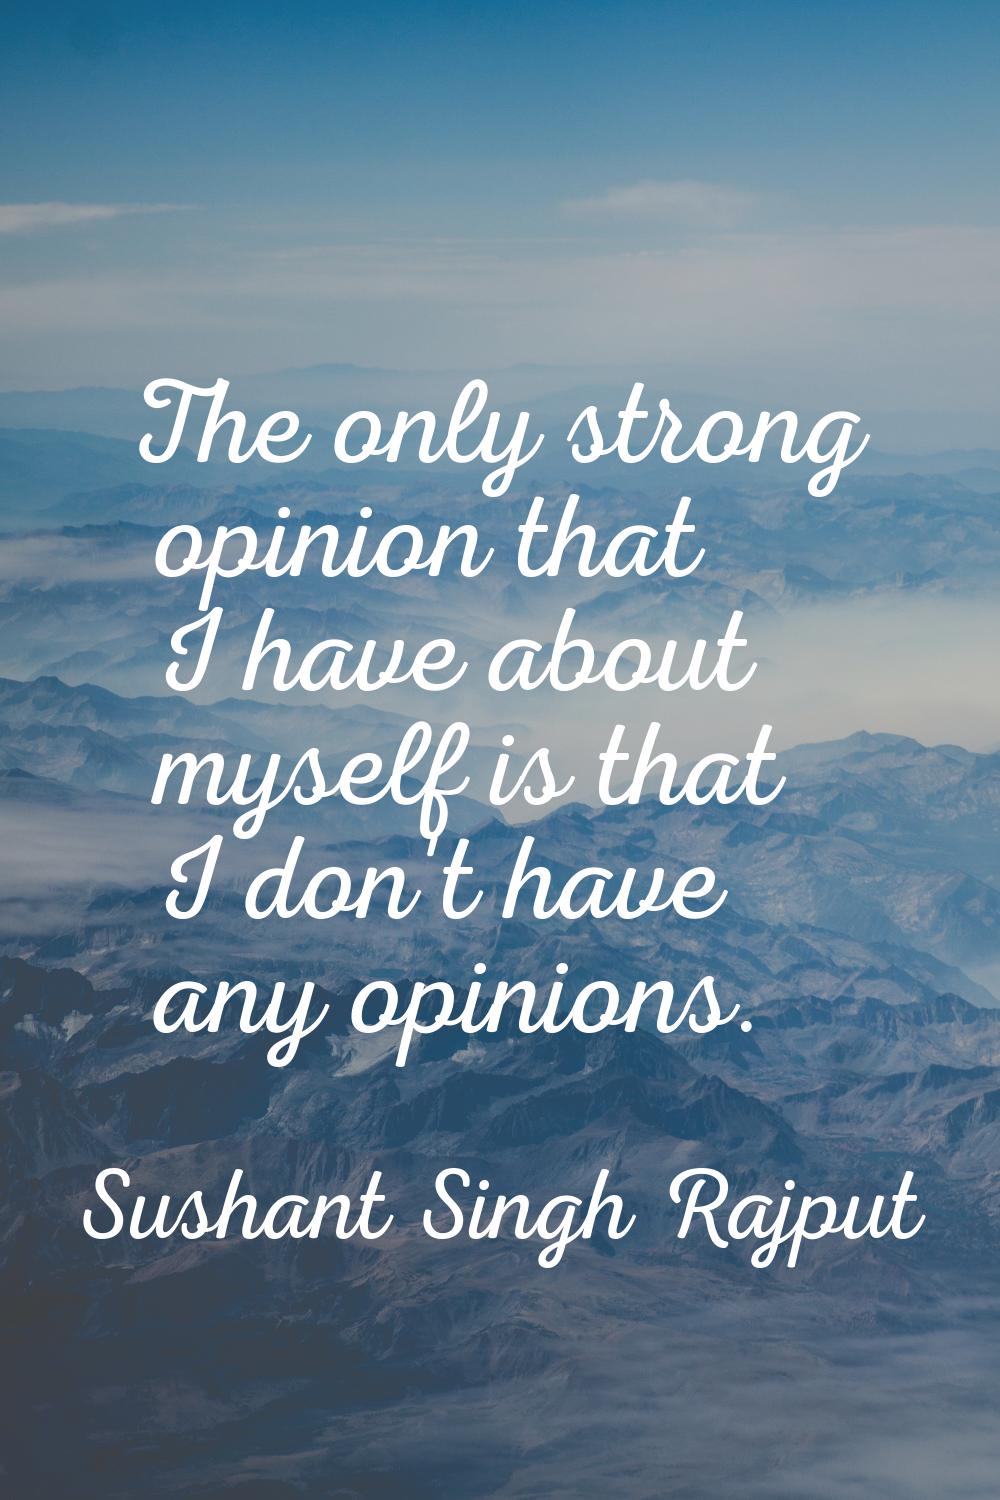 The only strong opinion that I have about myself is that I don't have any opinions.